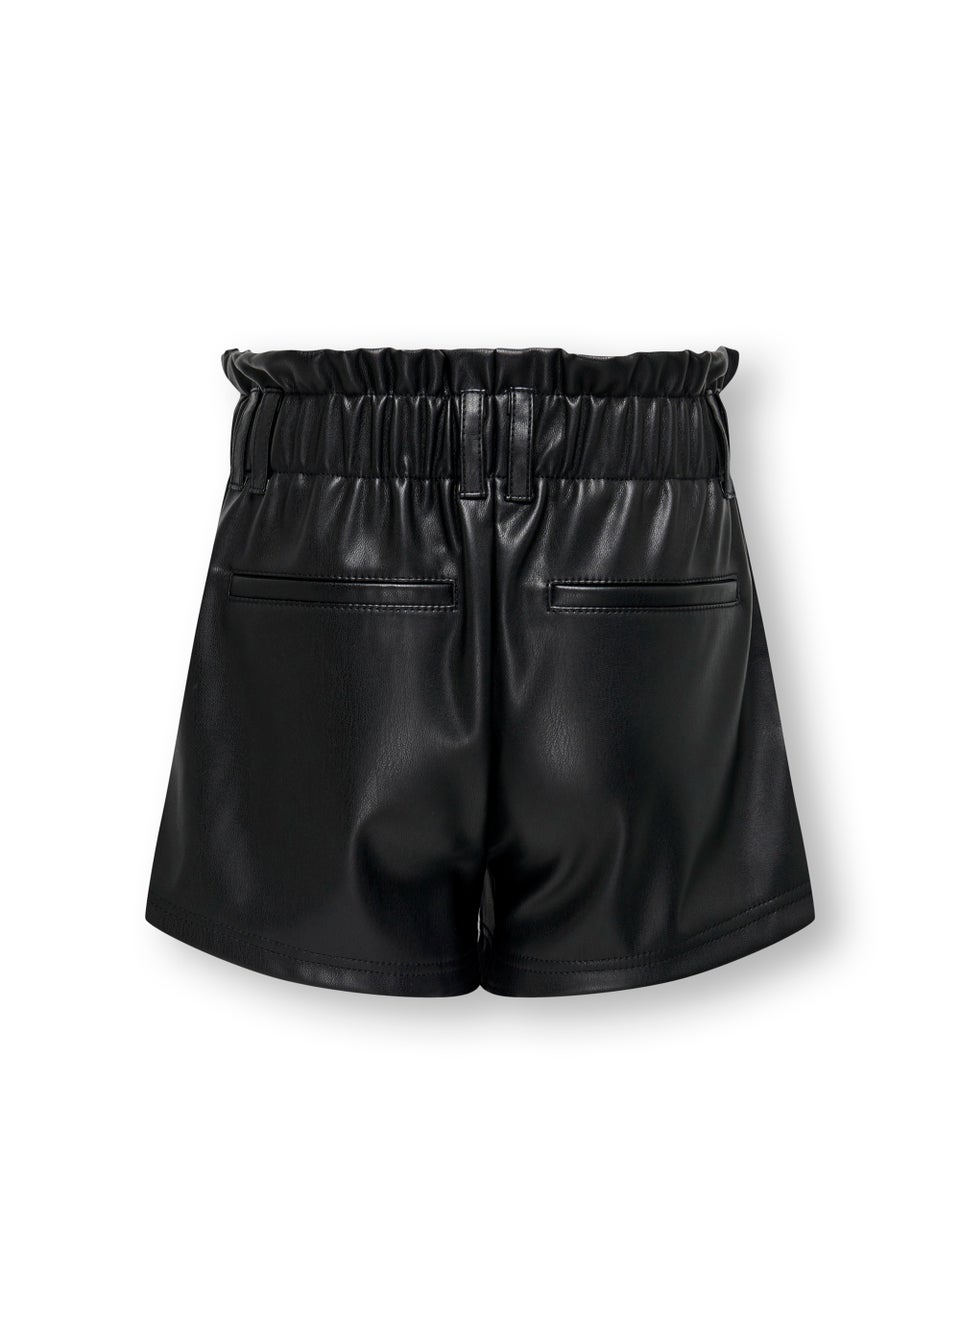 ONLY Kids Black Faux Leather Shorts (6-14yrs)